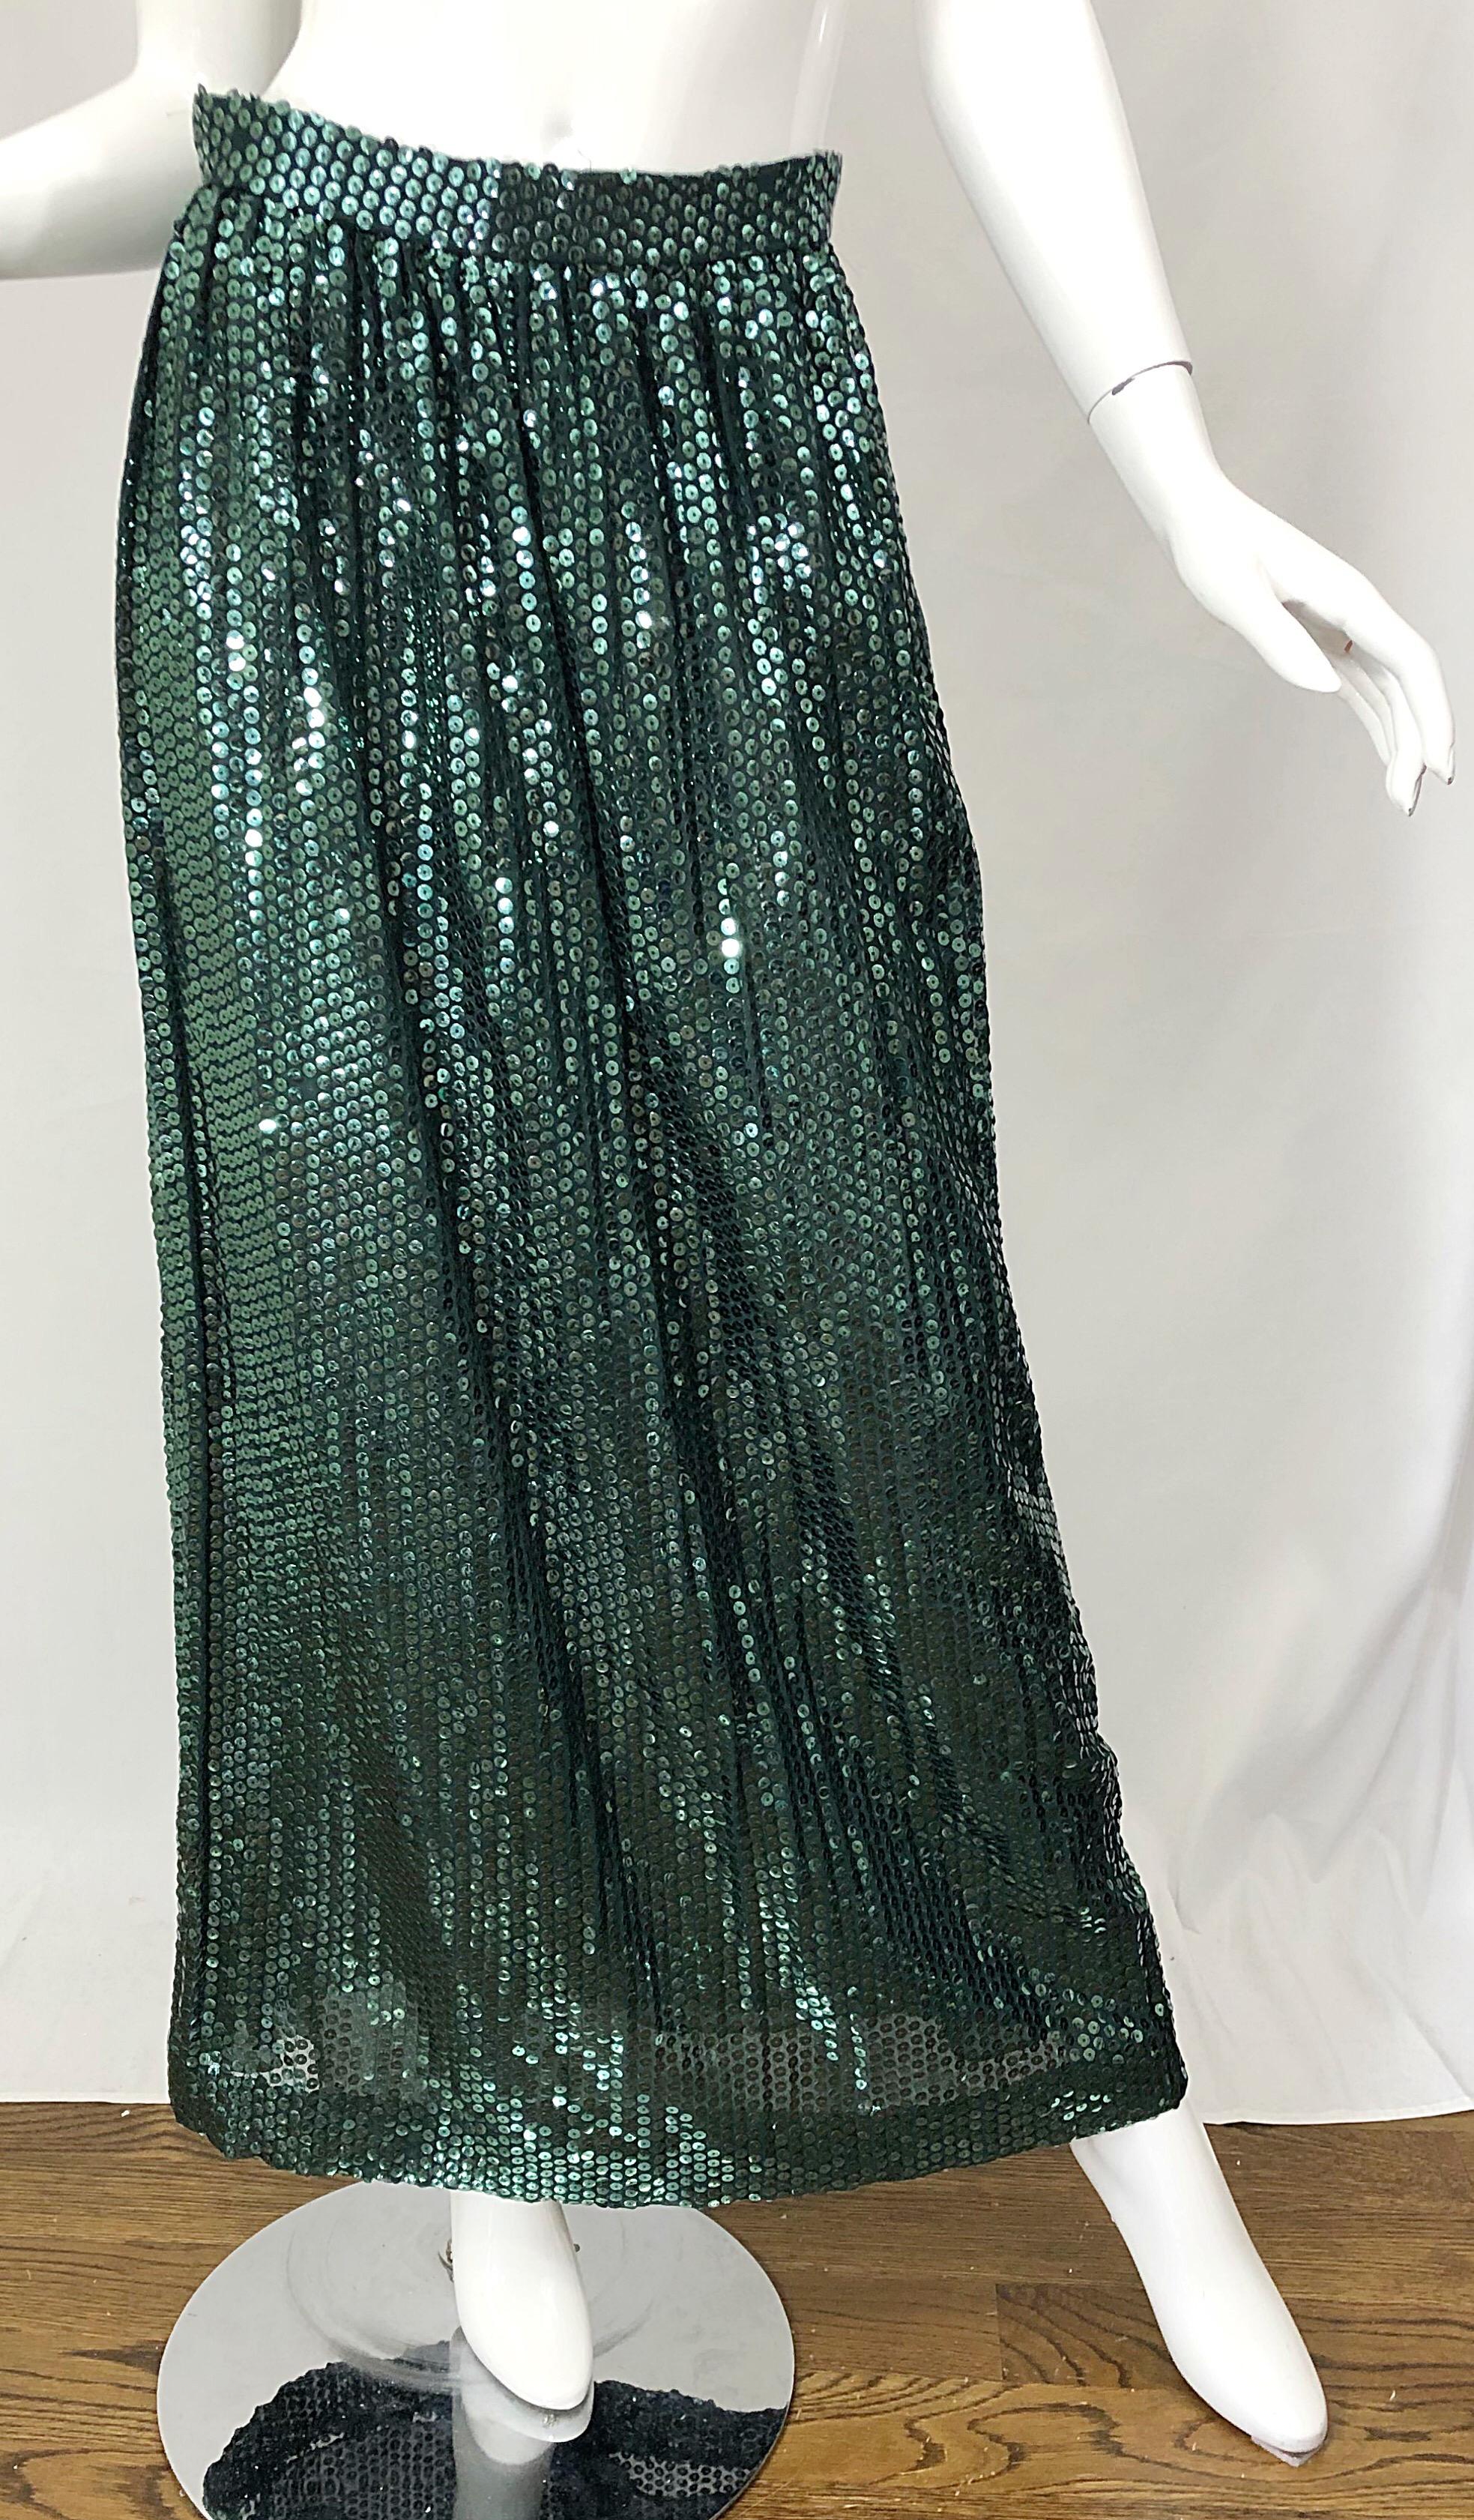 Beautiful 1970s vintage OSCAR DE LA RENTA hunter green silk chiffon fully sequined maxi skirt! Features thousands of hand-sewn hunter / forest green metallic sequins throughout the entire skirt. Two layers of the finest silk chiffon. Hidden metal